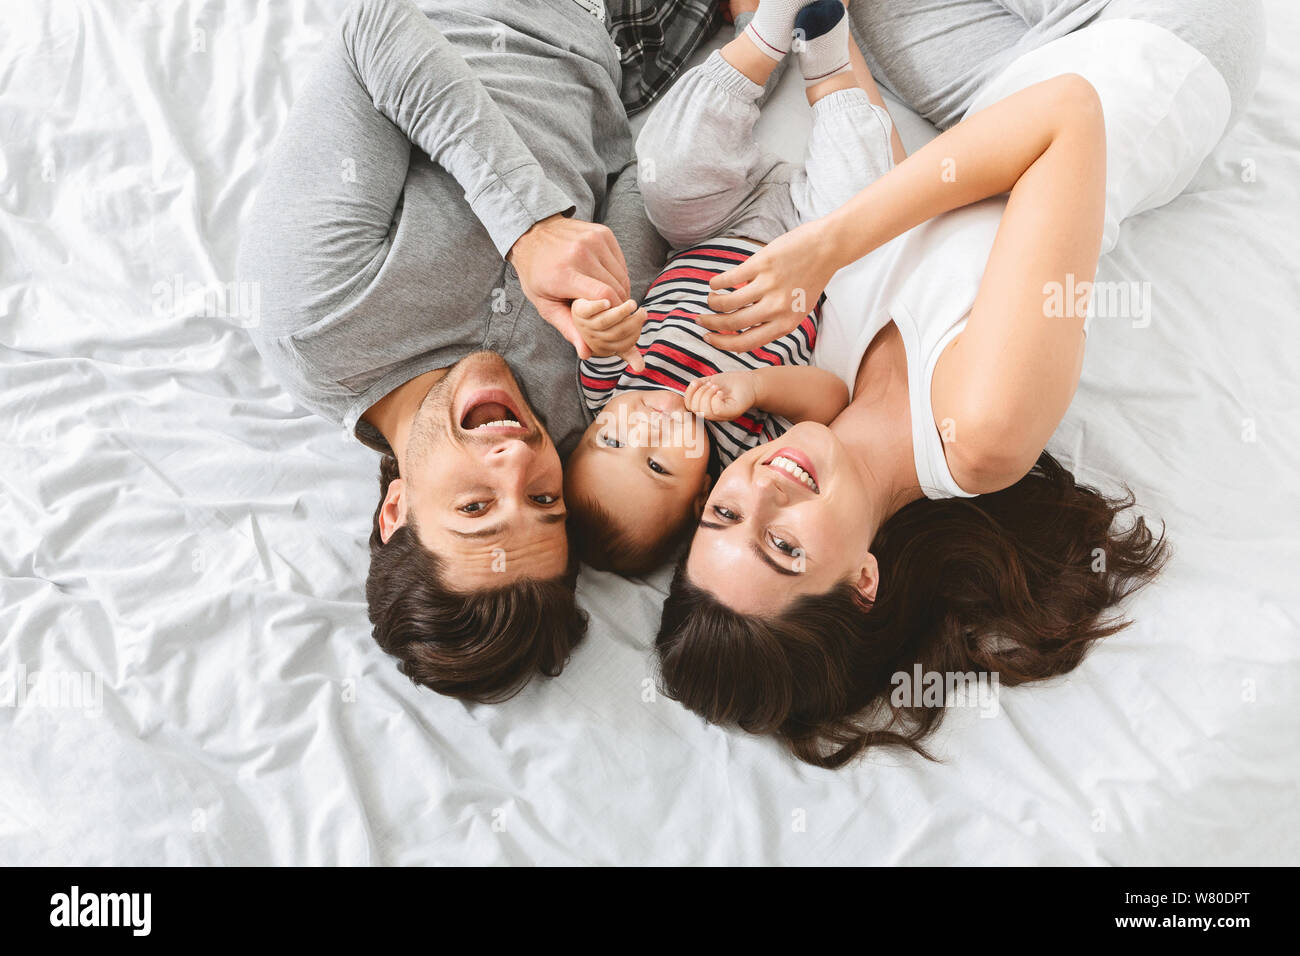 Young man, woman and baby cuddling in bed together Stock Photo